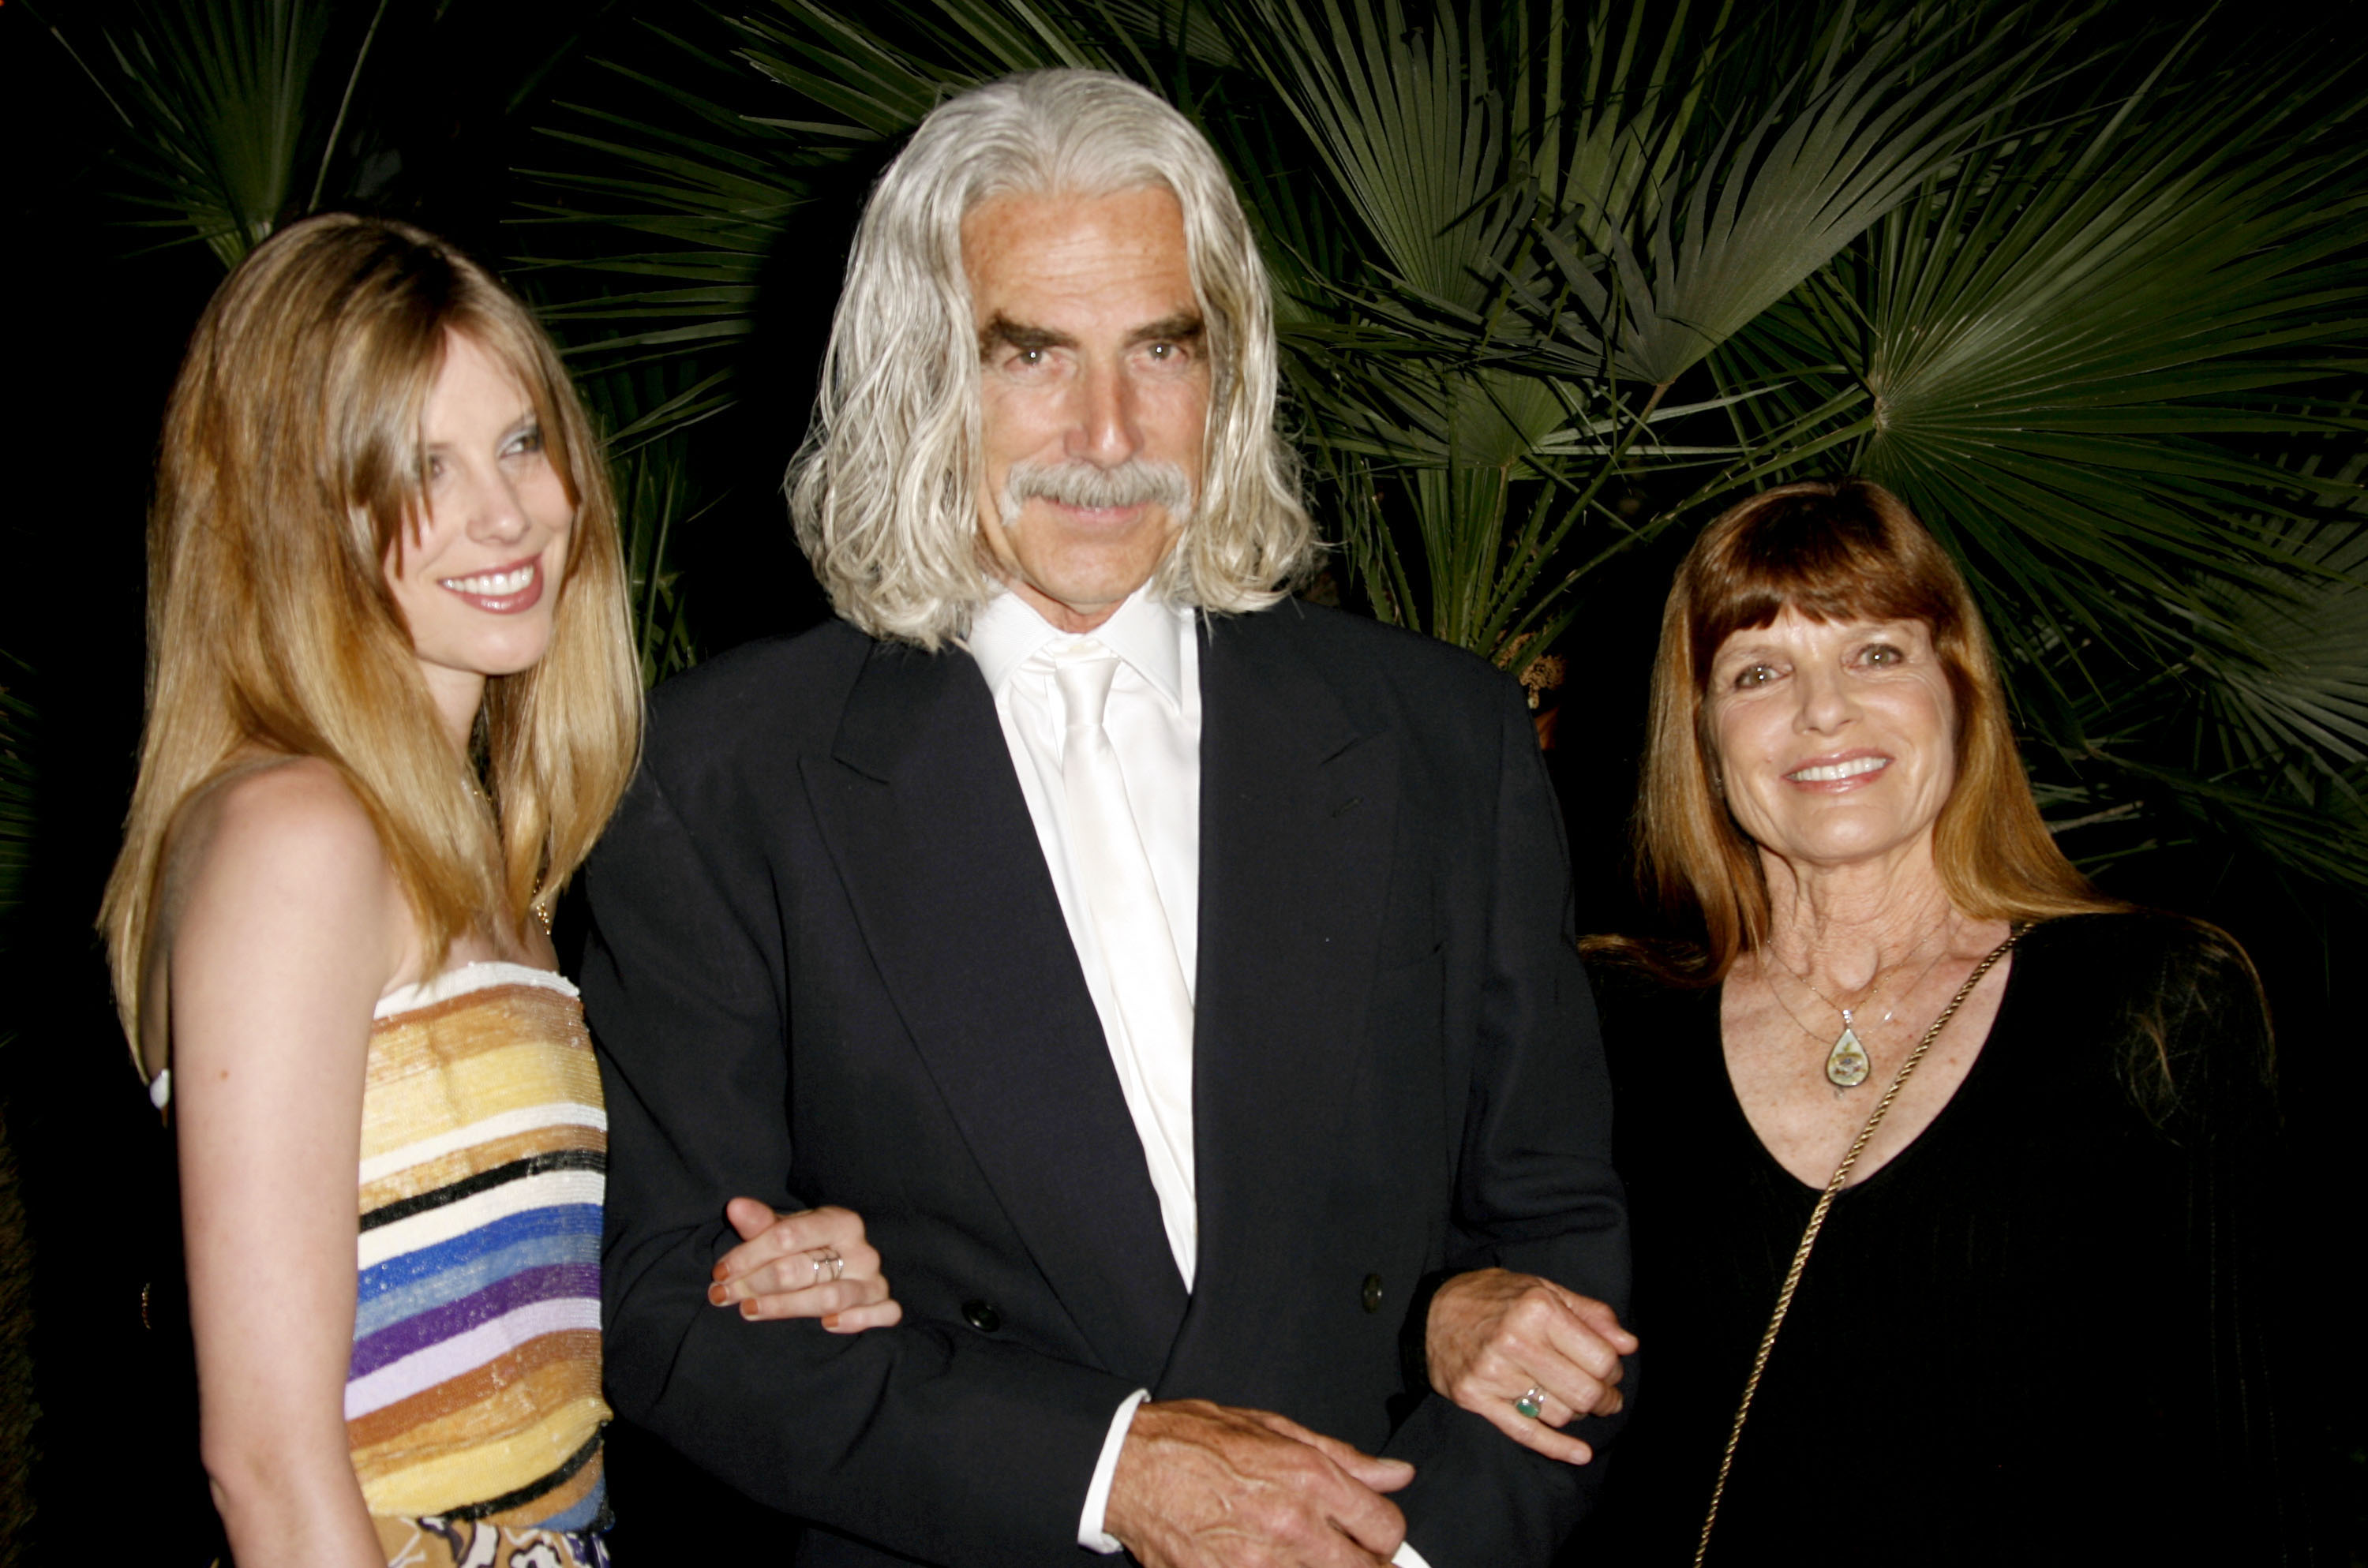 Cleo Rose Elliott, Sam Elliot, and Katherine Ross at the Cannes Film Festival - New Line 40th Anniversary "Golden Compass" Party on May 23, 2007, in Cannes, France | Source: Getty Images